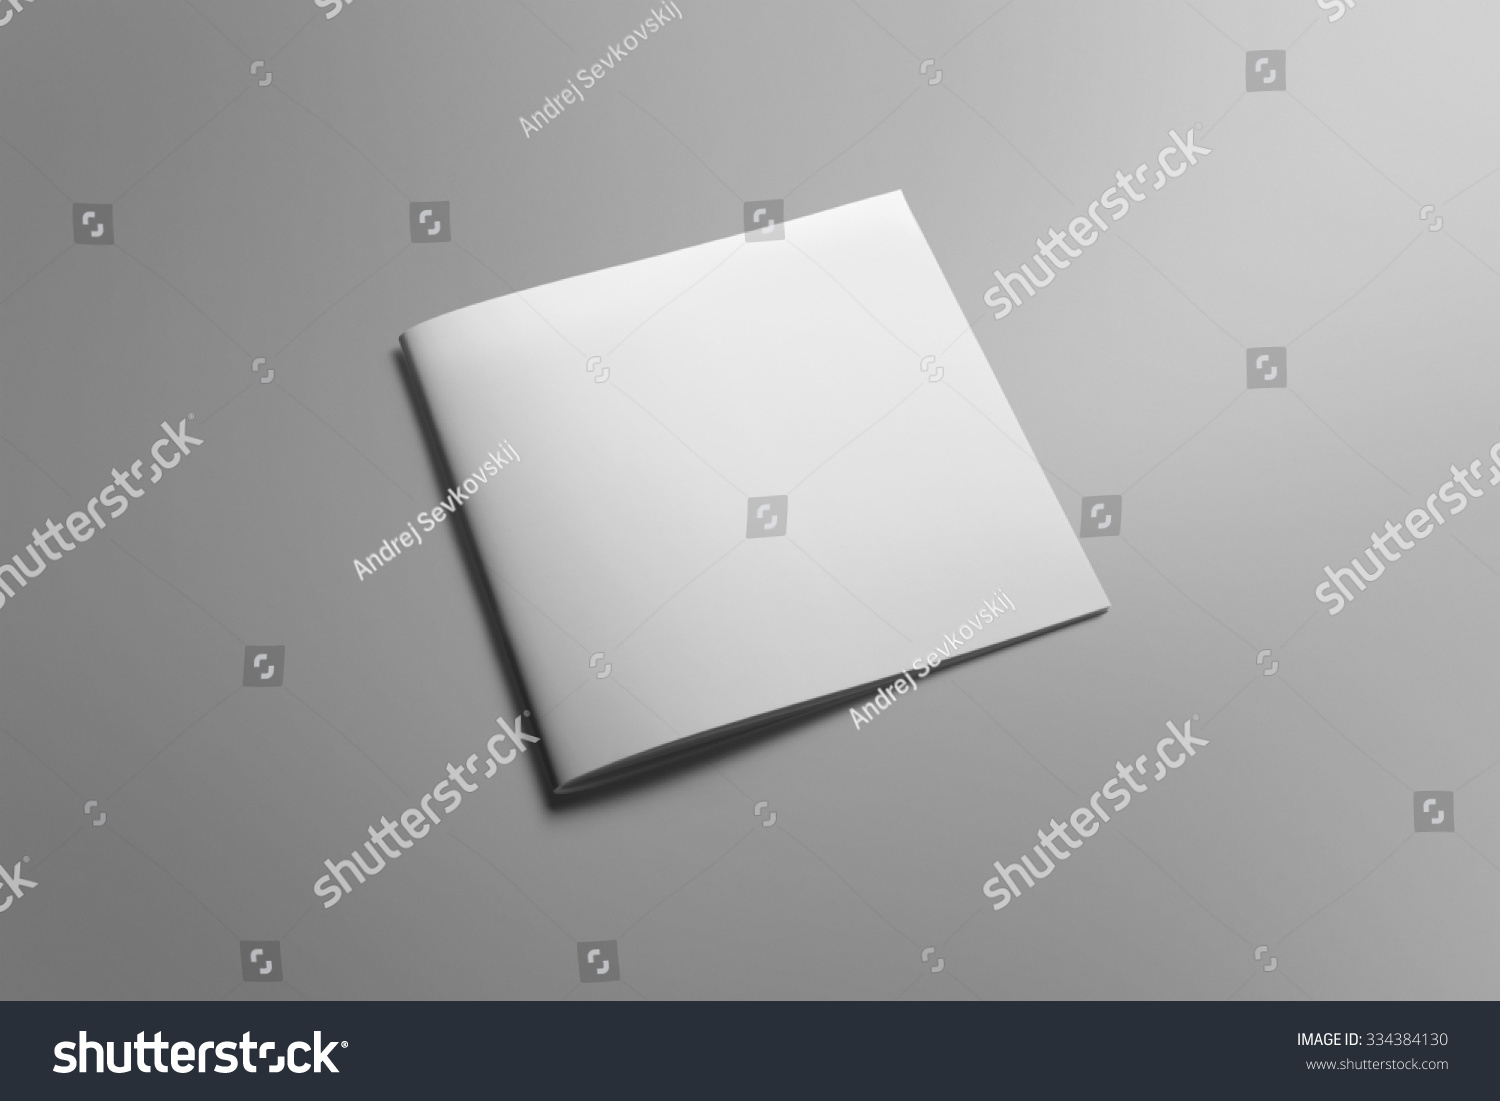 Blank square brochure magazine isolated on grey, with clipping path, changeable background #334384130